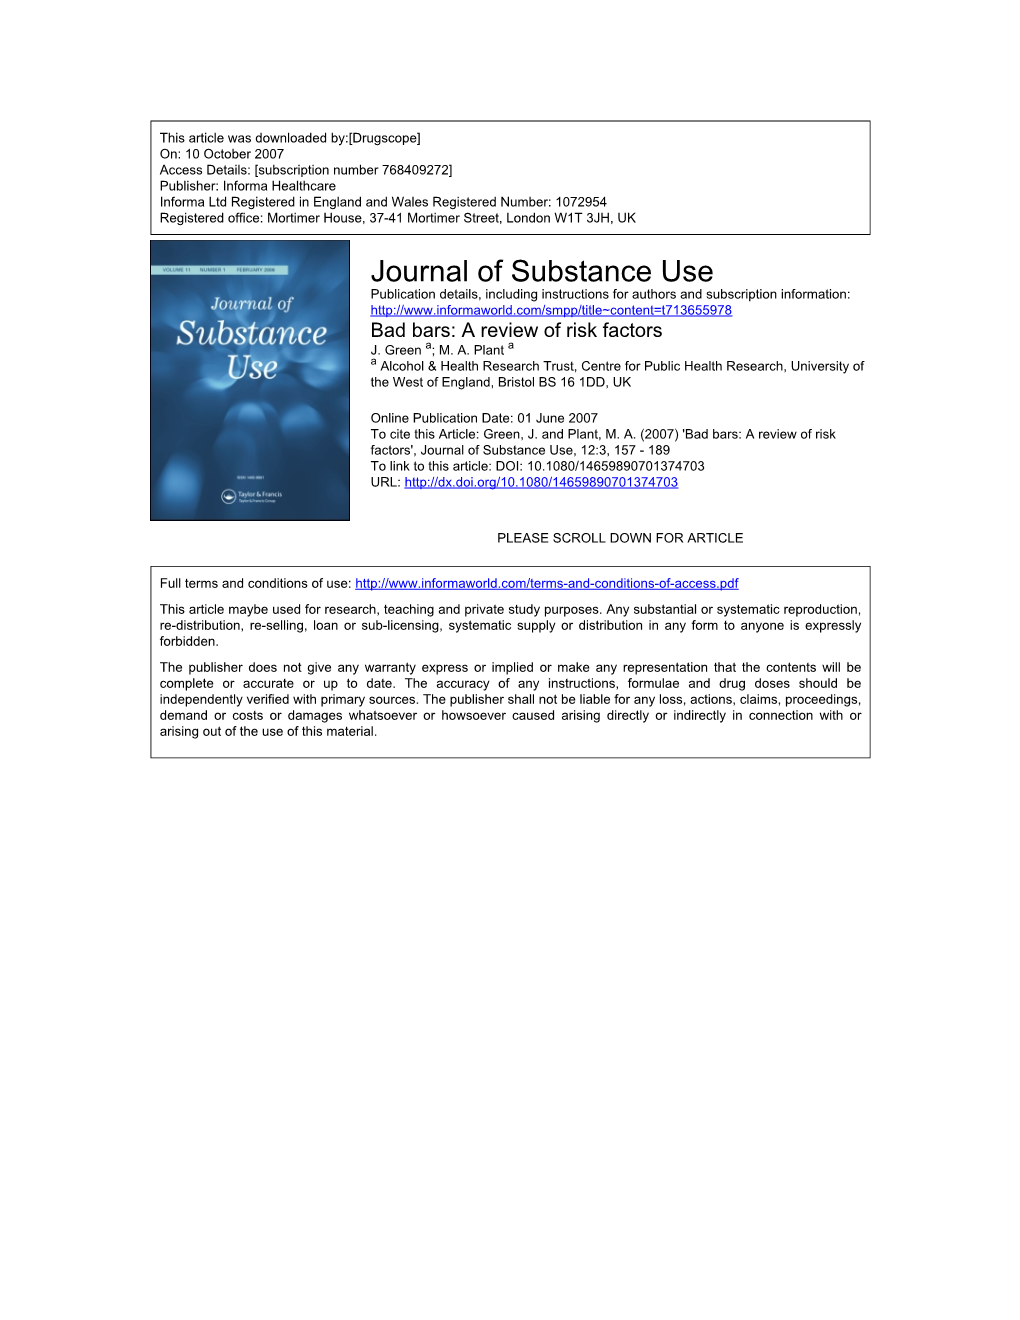 Journal of Substance